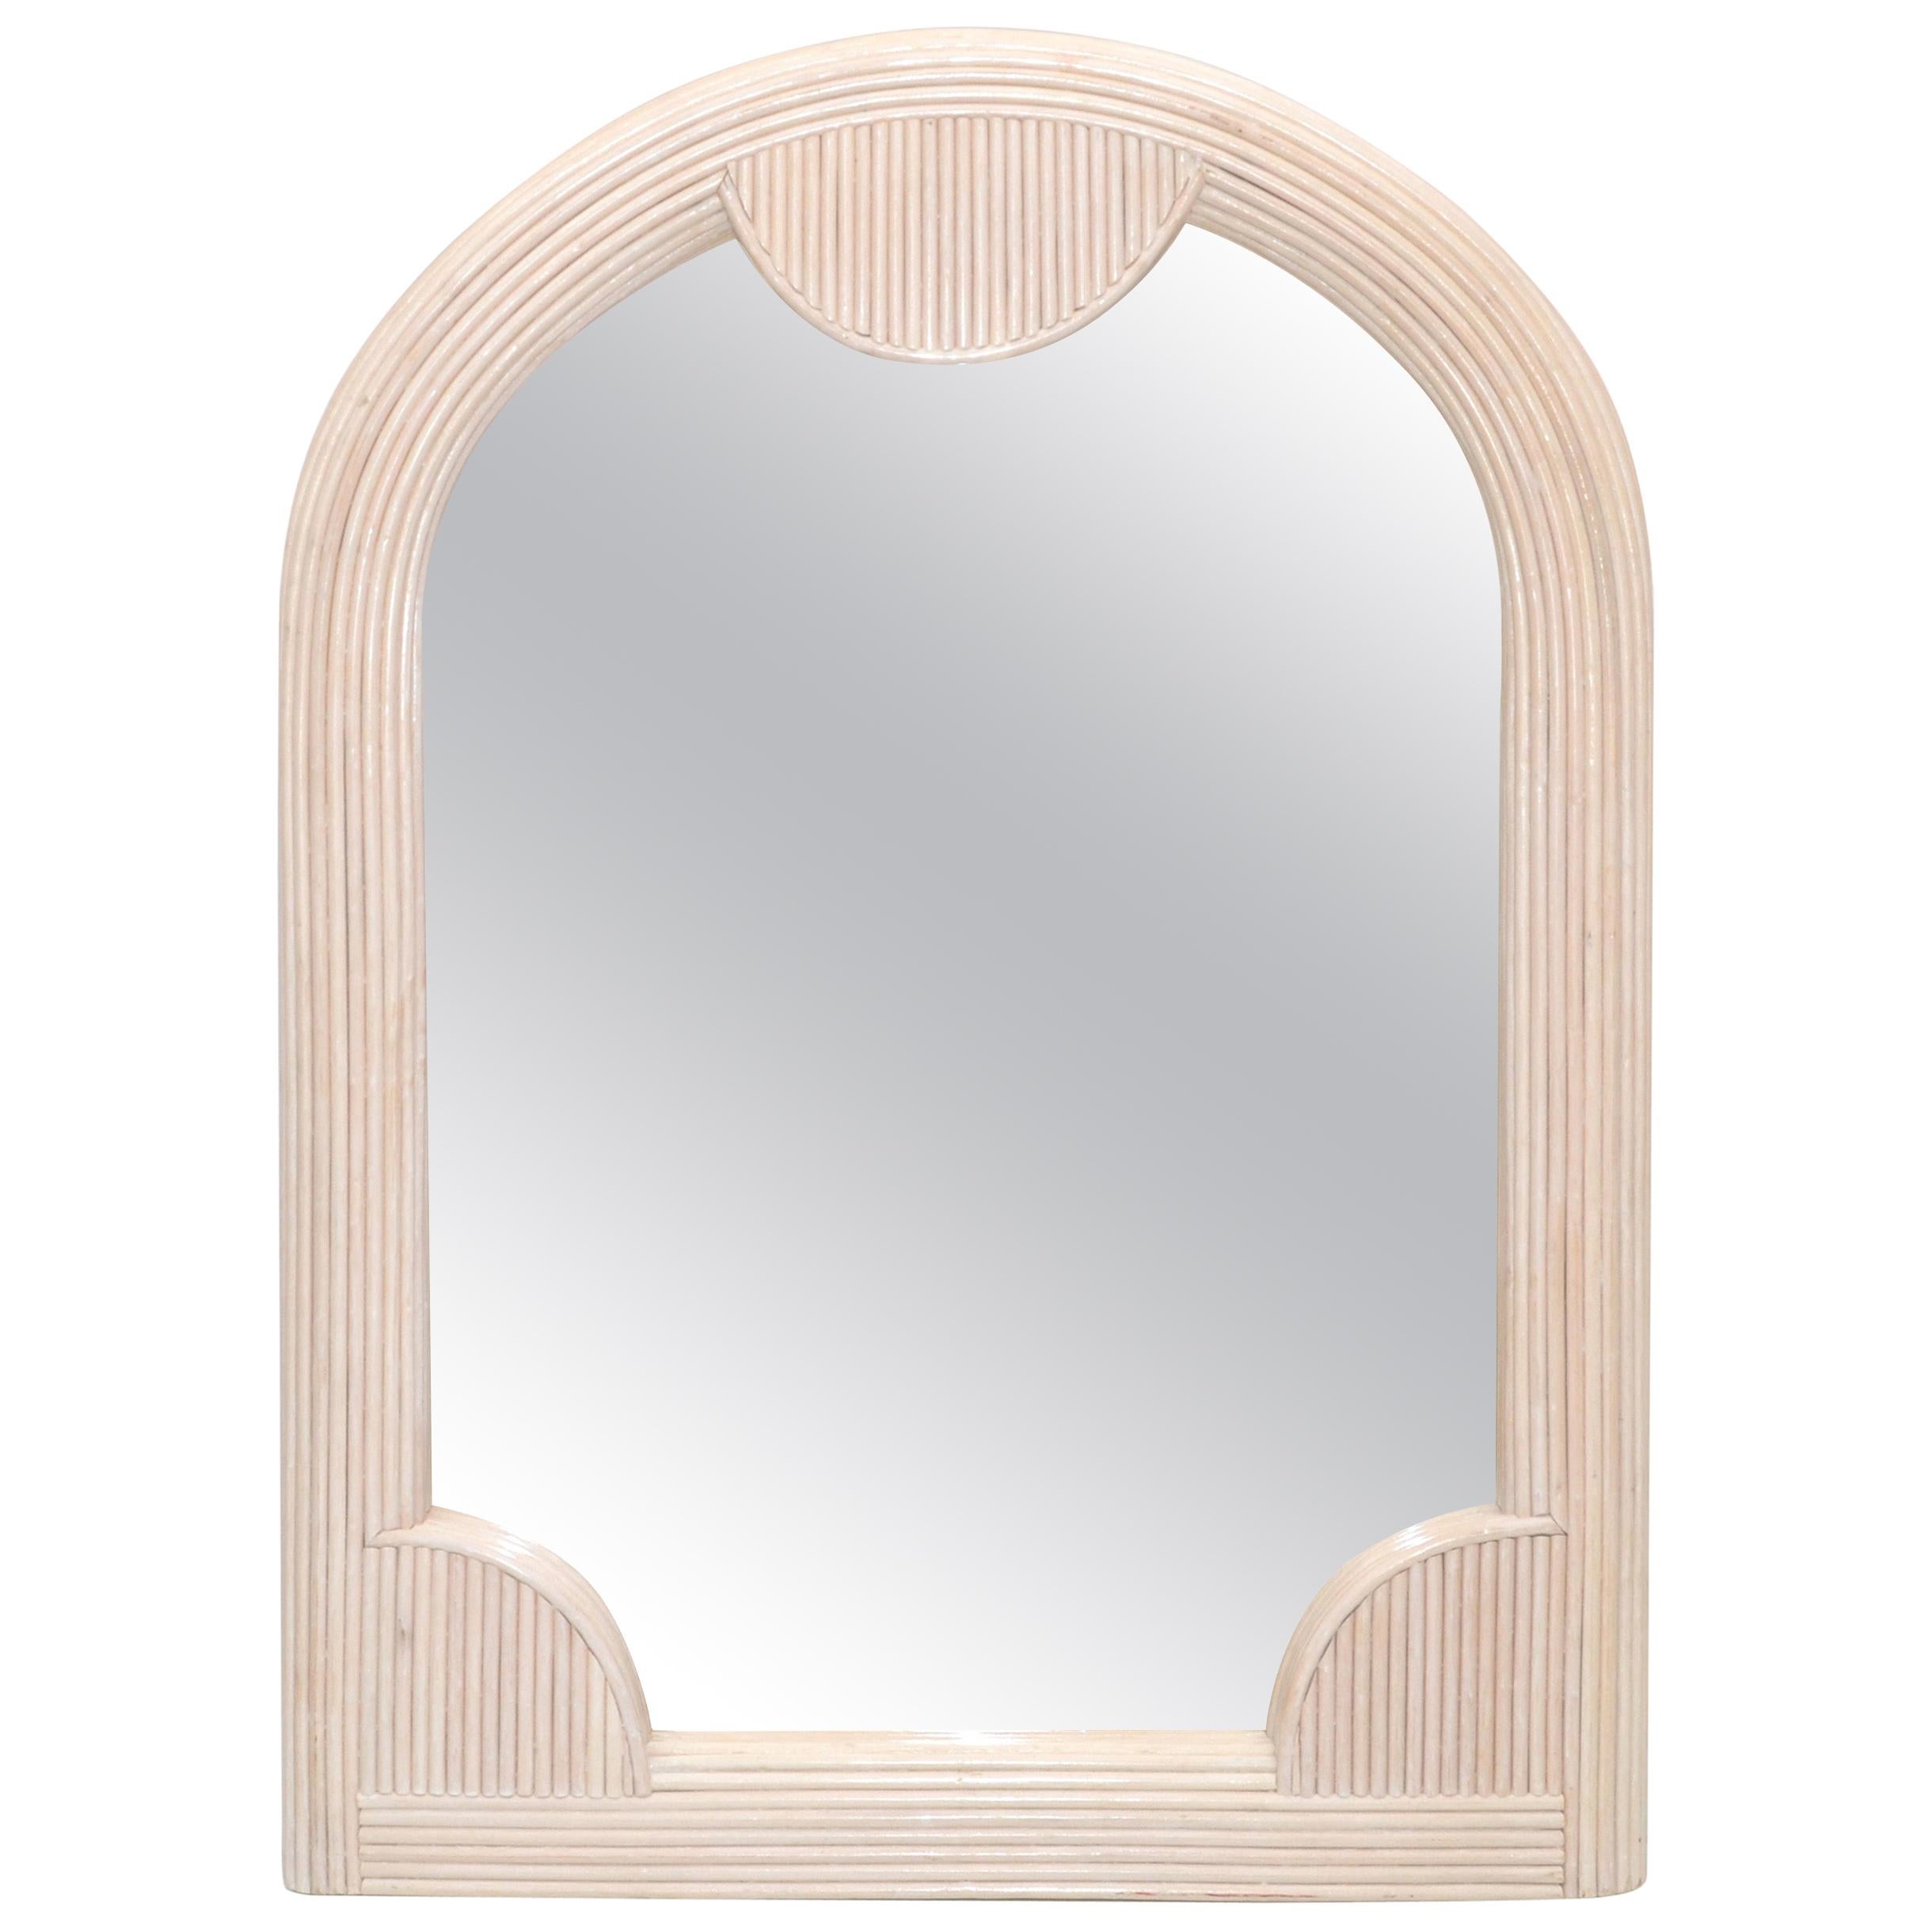 Boho Chic Mid-Century Modern Arch Handmade White Washed Pencil Reed Wall Mirror For Sale